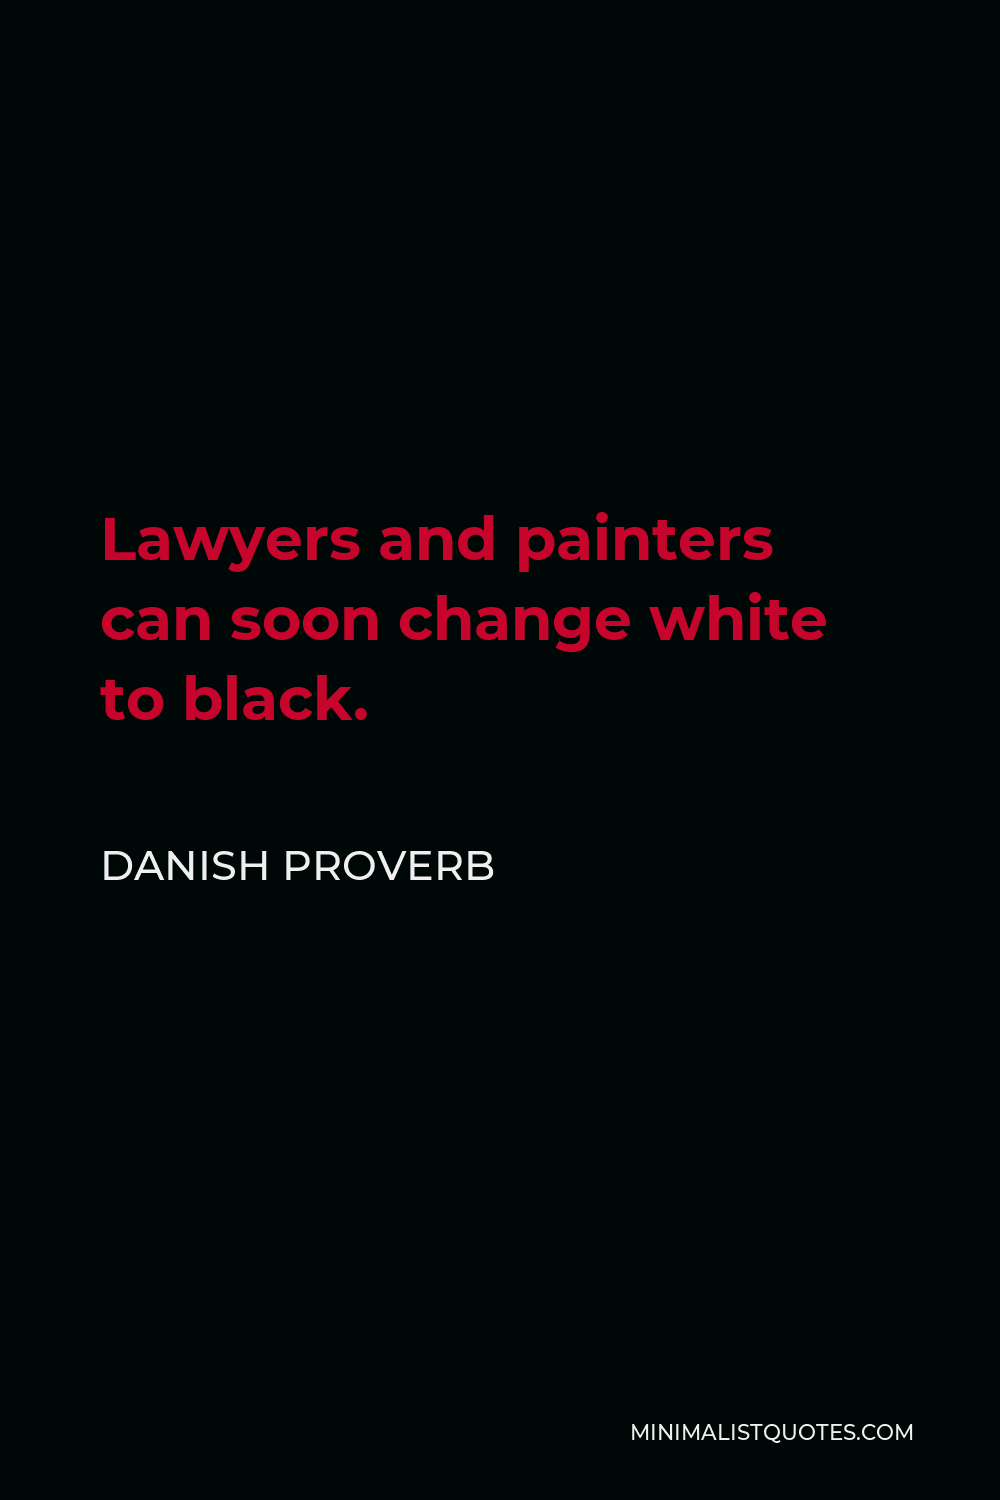 Danish Proverb Quote - Lawyers and painters can soon change white to black.